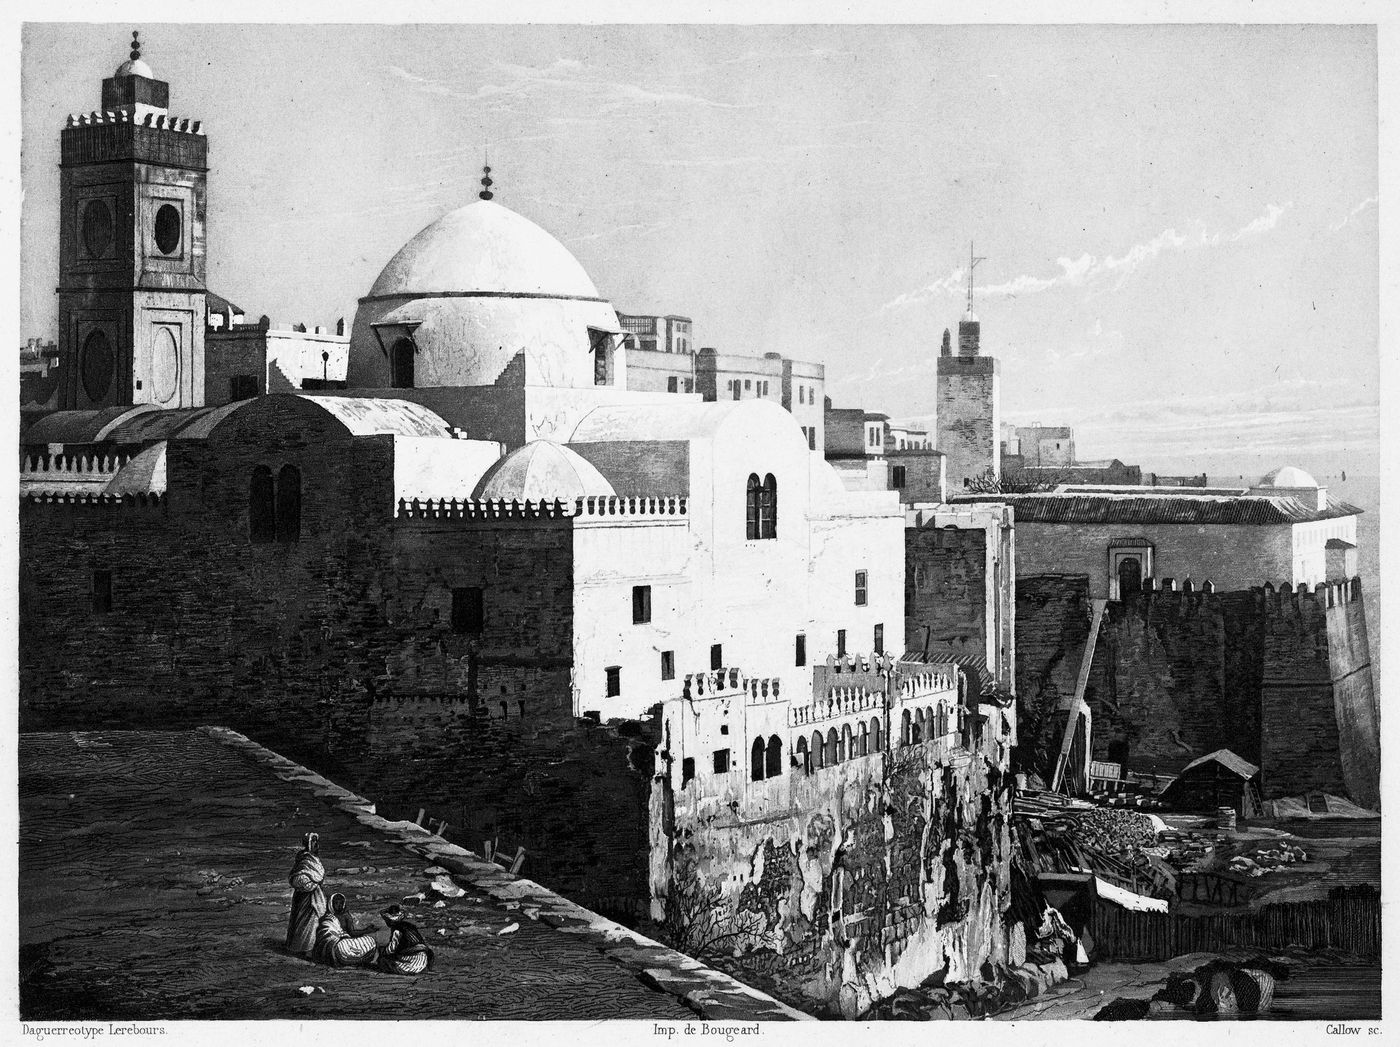 View of the Great Mosque in Algiers, Algeria
